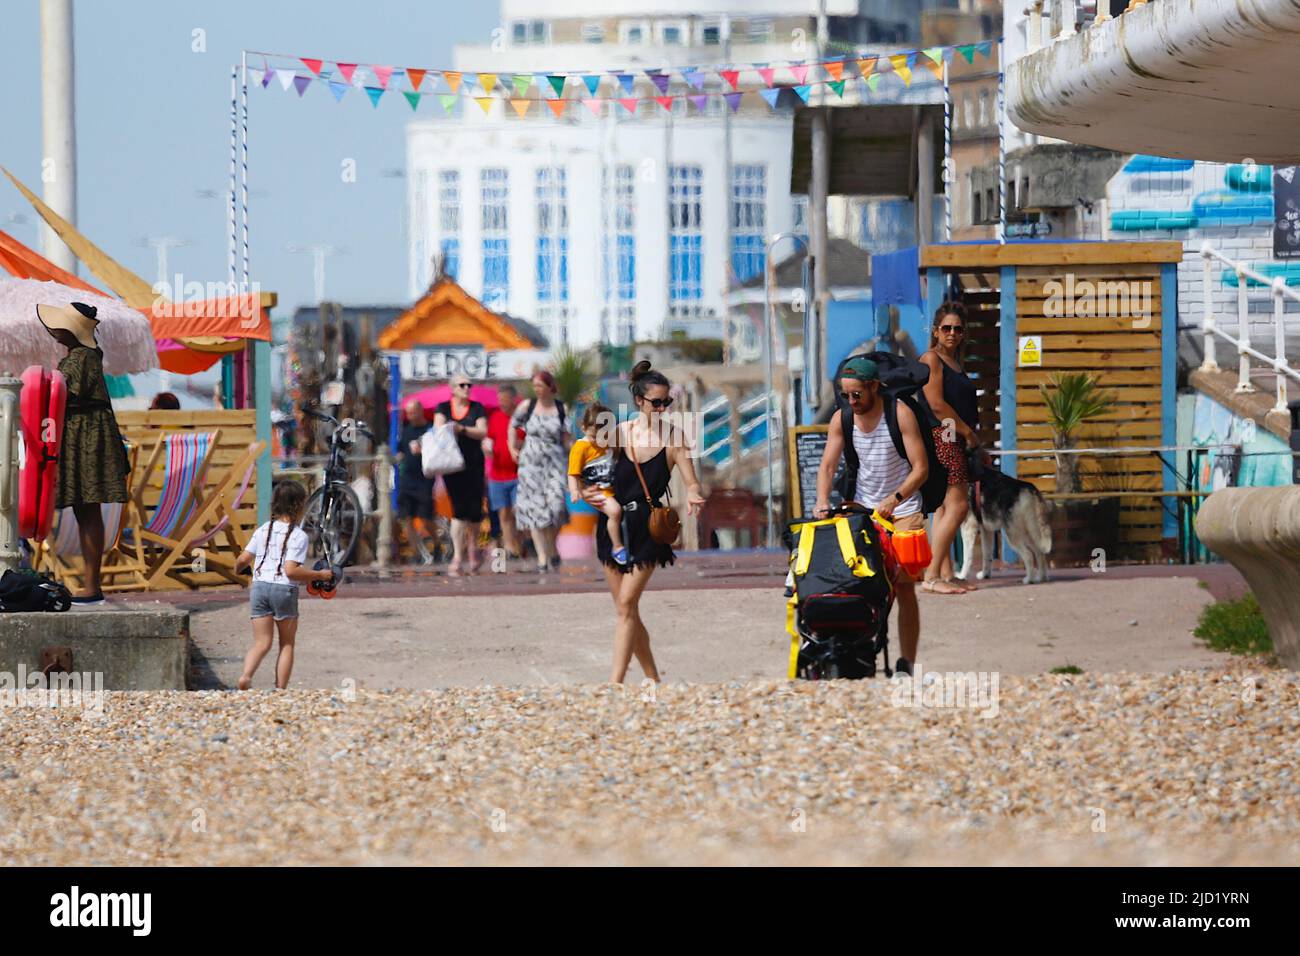 Hastings, East Sussex, UK. 17 Jun, 2022. UK Weather: Very hot and sunny at the seaside town of Hastings in East Sussex as Brits enjoy the very hot weather today that is expected to reach 34c in some parts of the UK. Families arriving to the beach. Photo Credit: Paul Lawrenson /Alamy Live News Stock Photo